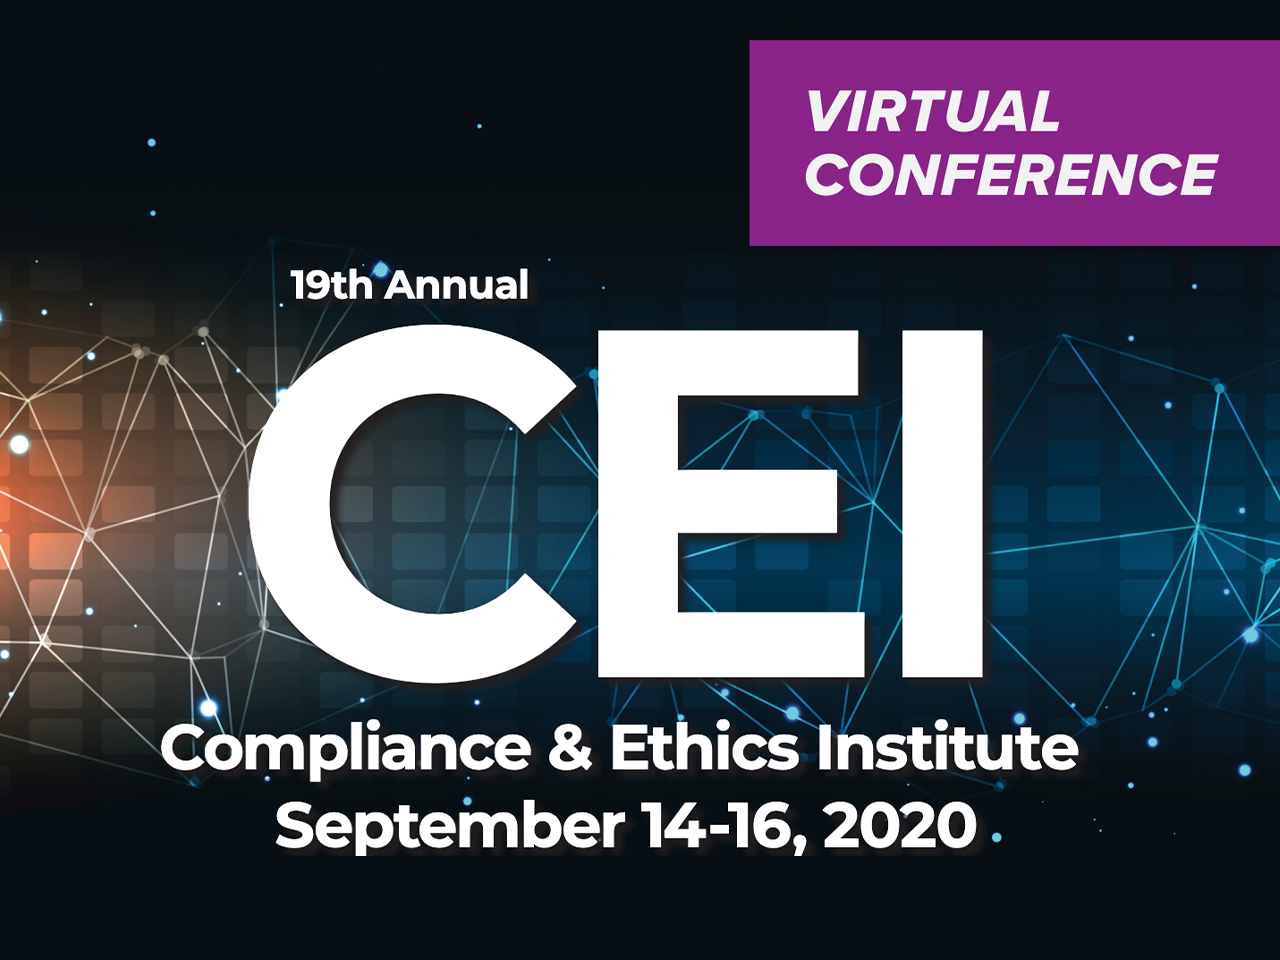 19th Annual Compliance & Ethics Institute (VIRTUAL EVENT)